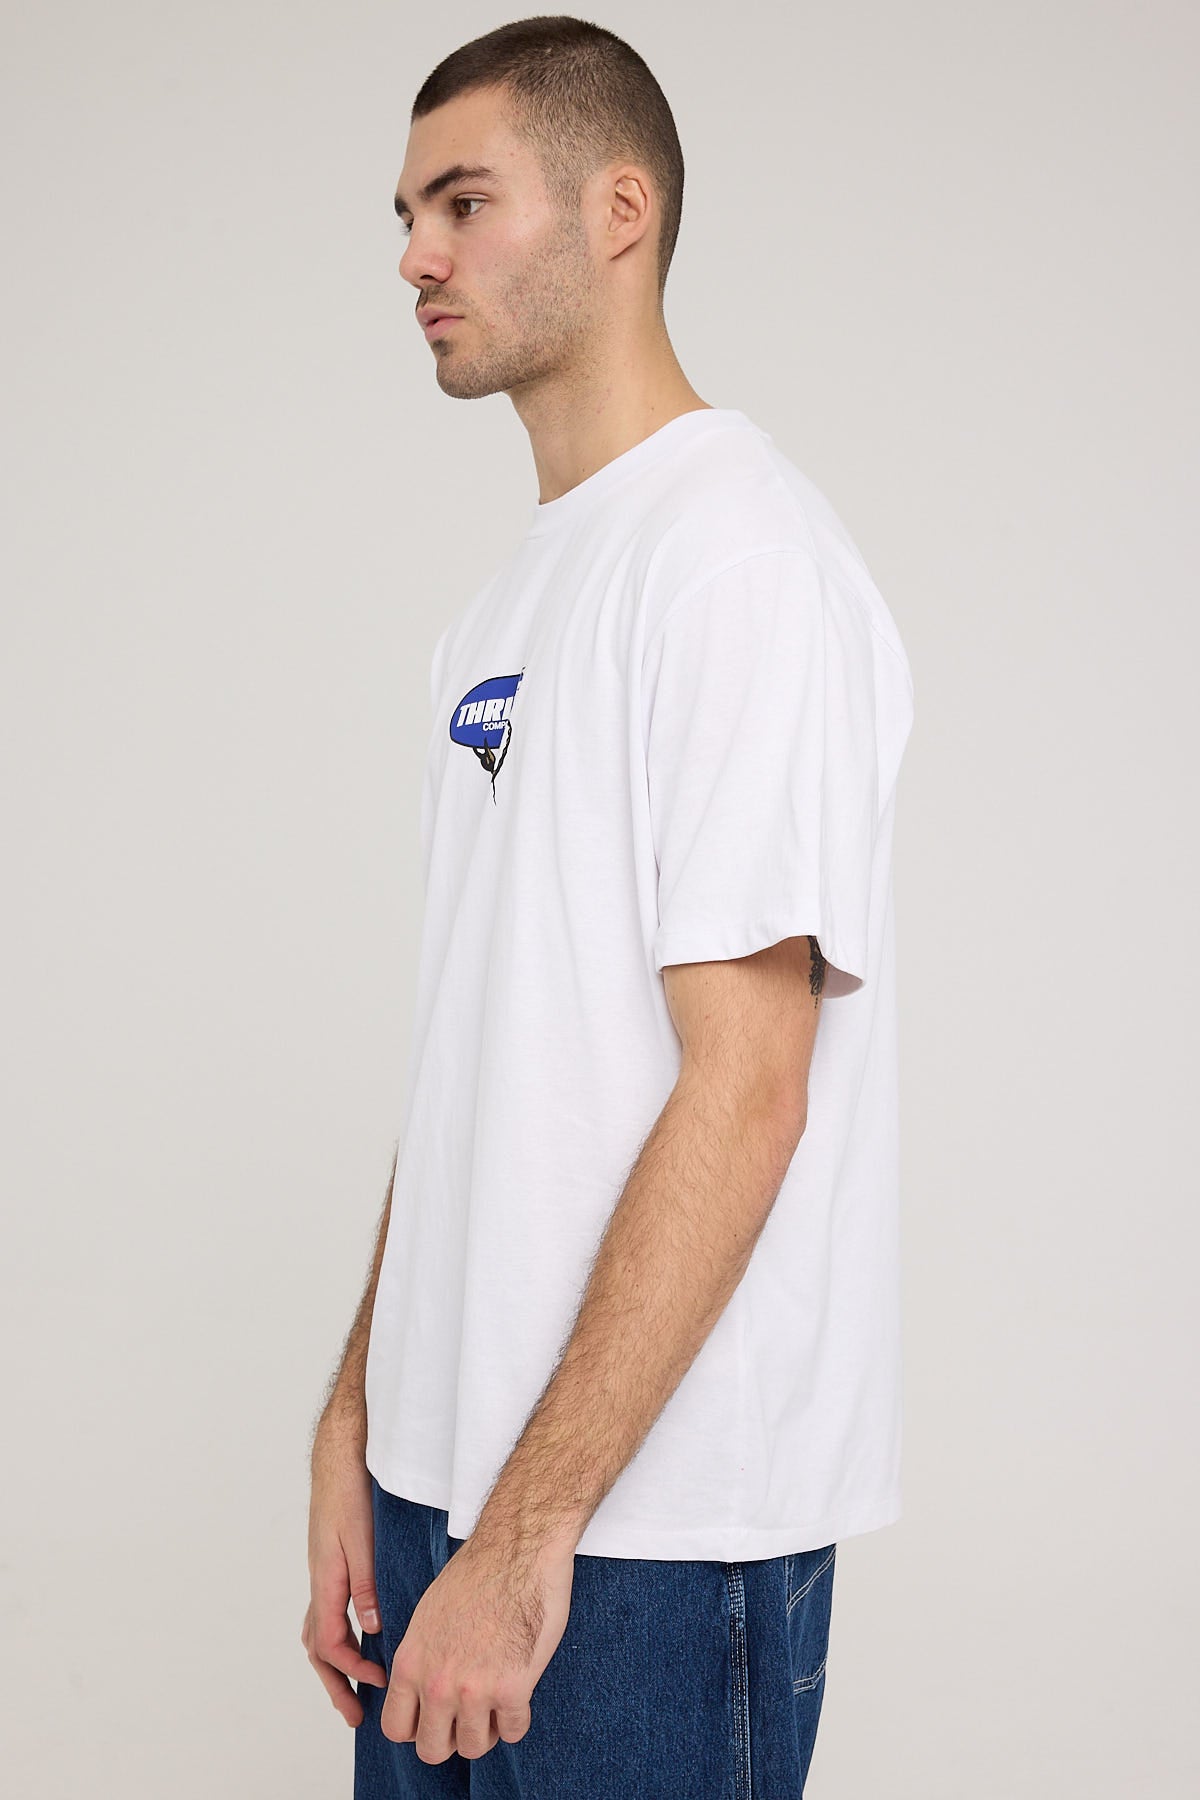 Thrills Lifted Merch Fit Tee White